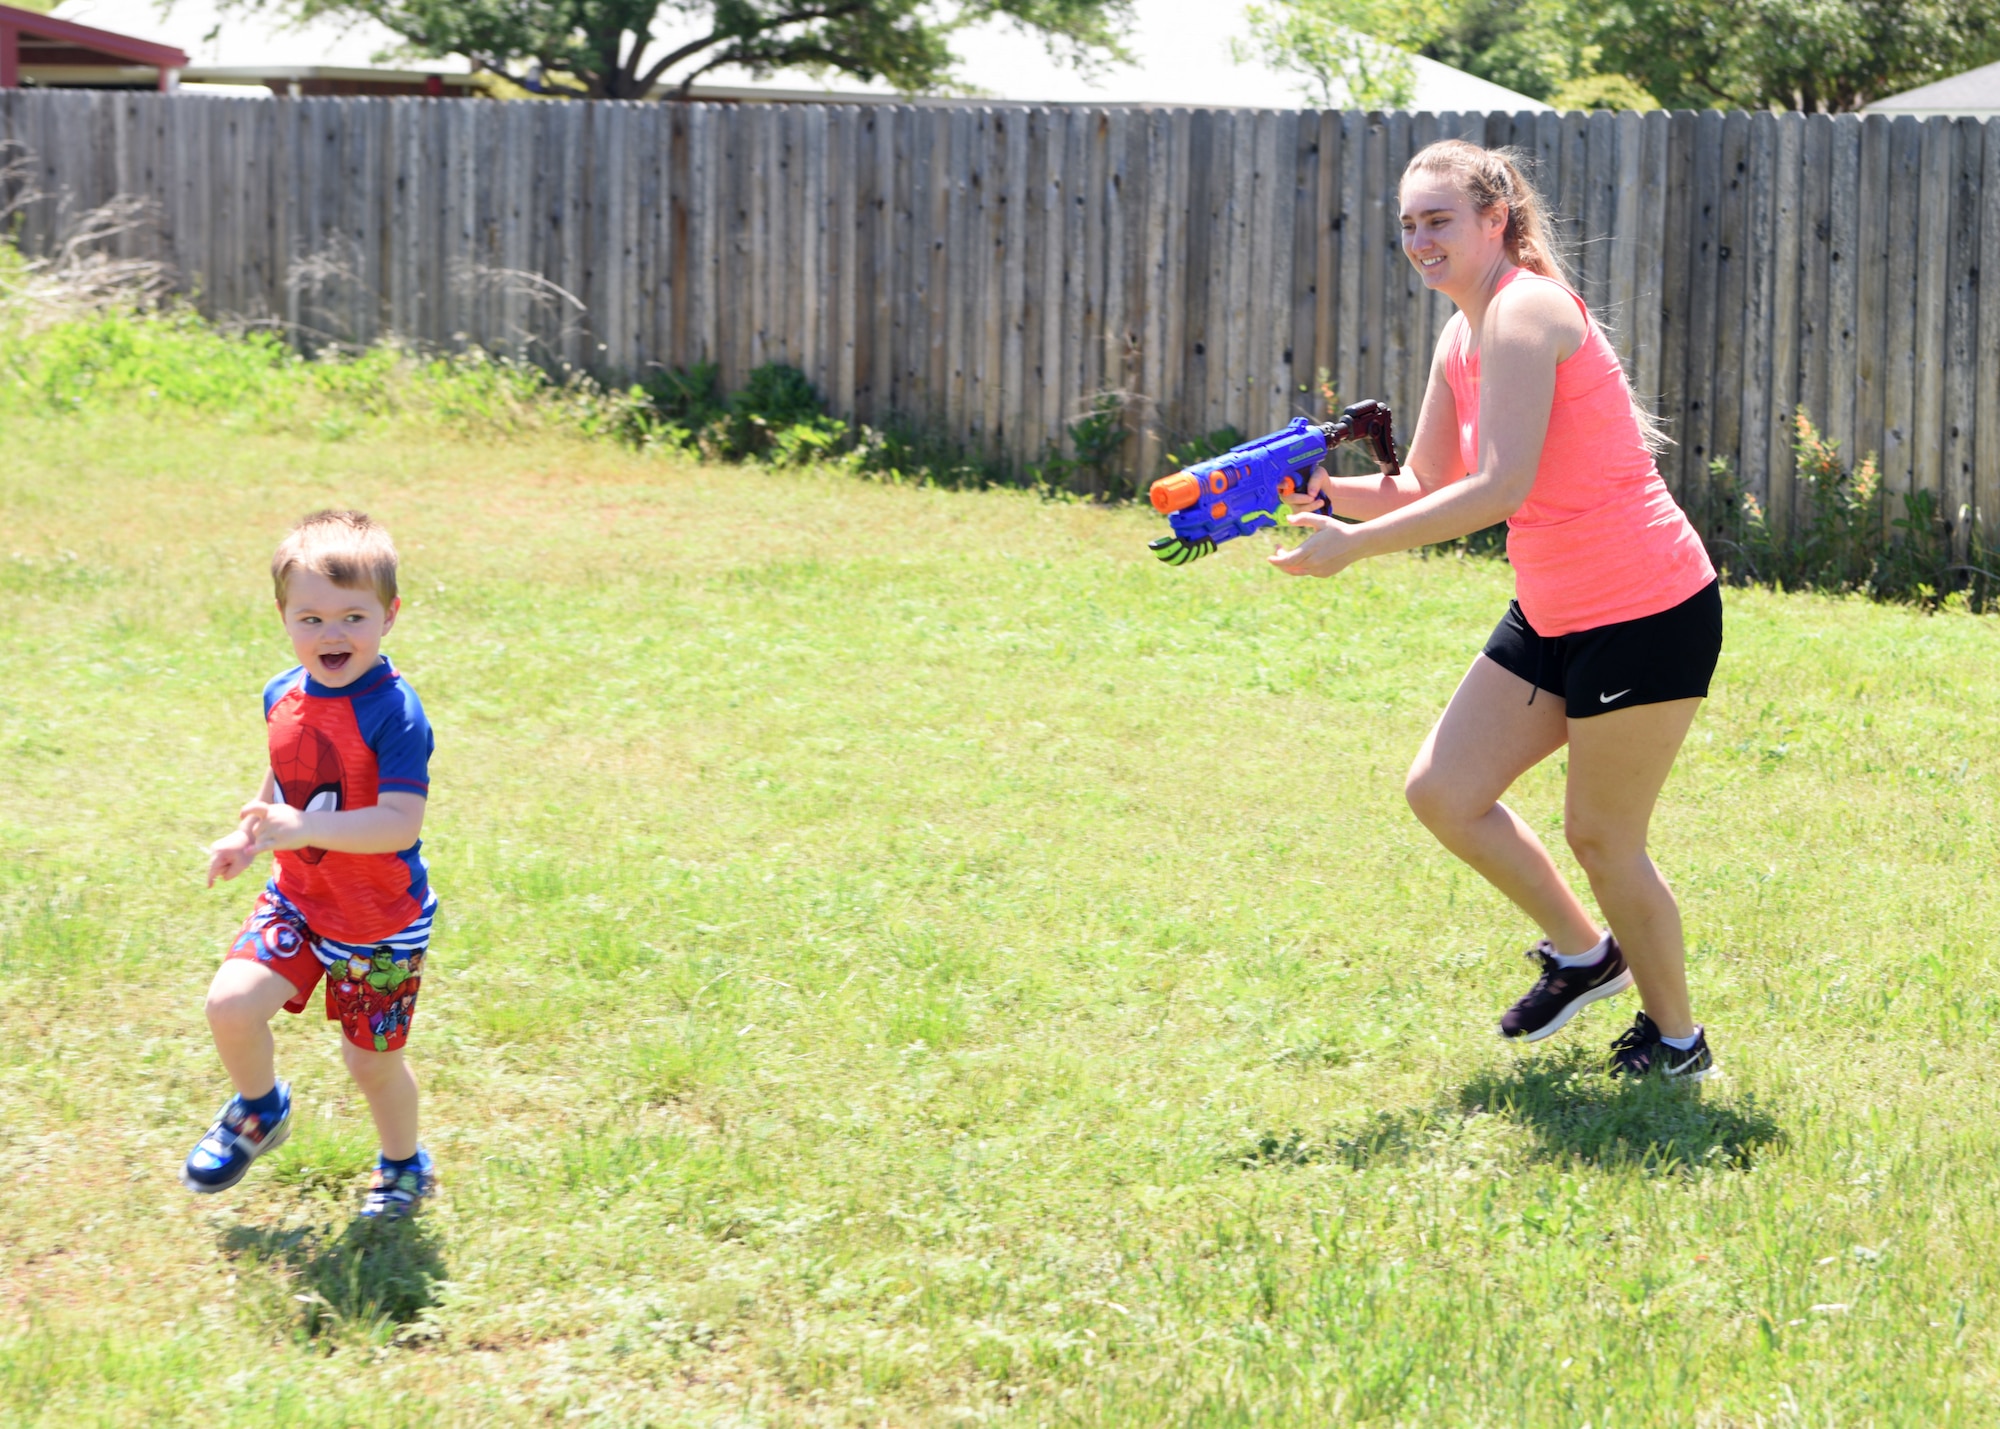 Sydney Sherwood squirts Colby, 3, with a water gun in San Angelo, Texas, April 16, 2020. Water guns have been popular since the late 1800s and remain a popular pastime on hot days. (U.S. Air Force photo by Airman 1st Class Ethan Sherwood)